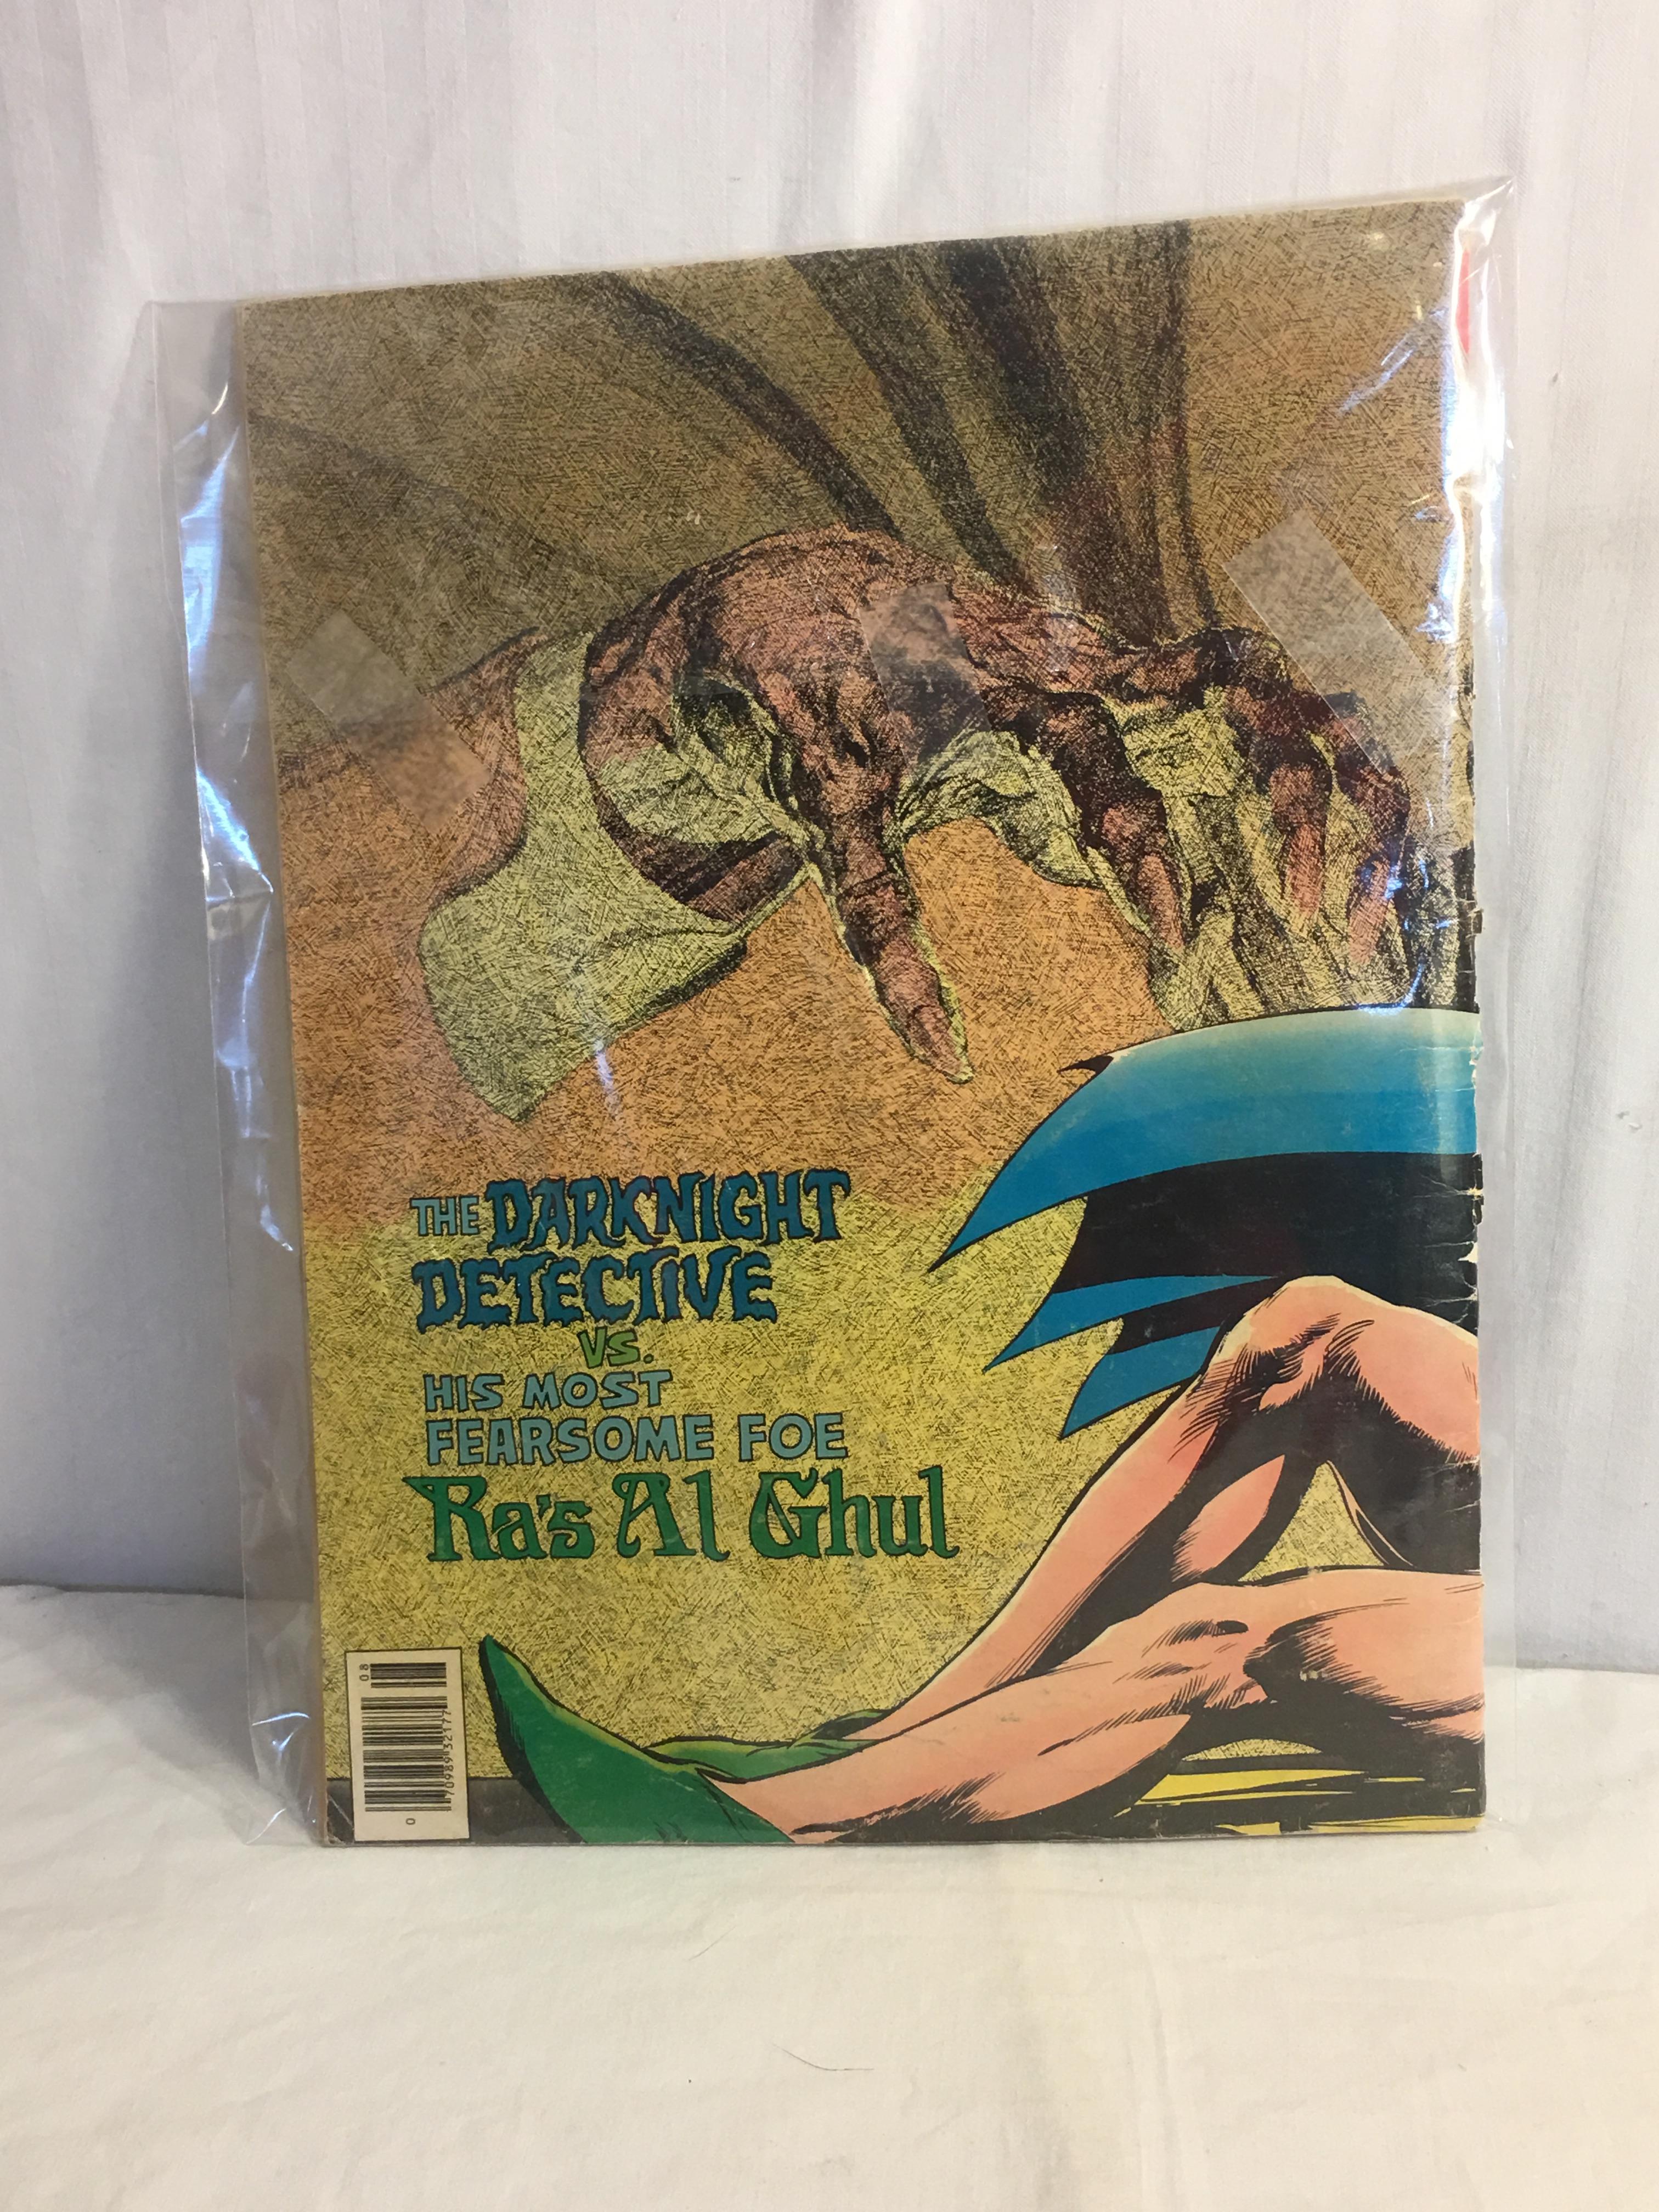 Collector Vintage Limited Edition Presents Batman Eic Adventure A 76 Page Novel In Comics Magazine